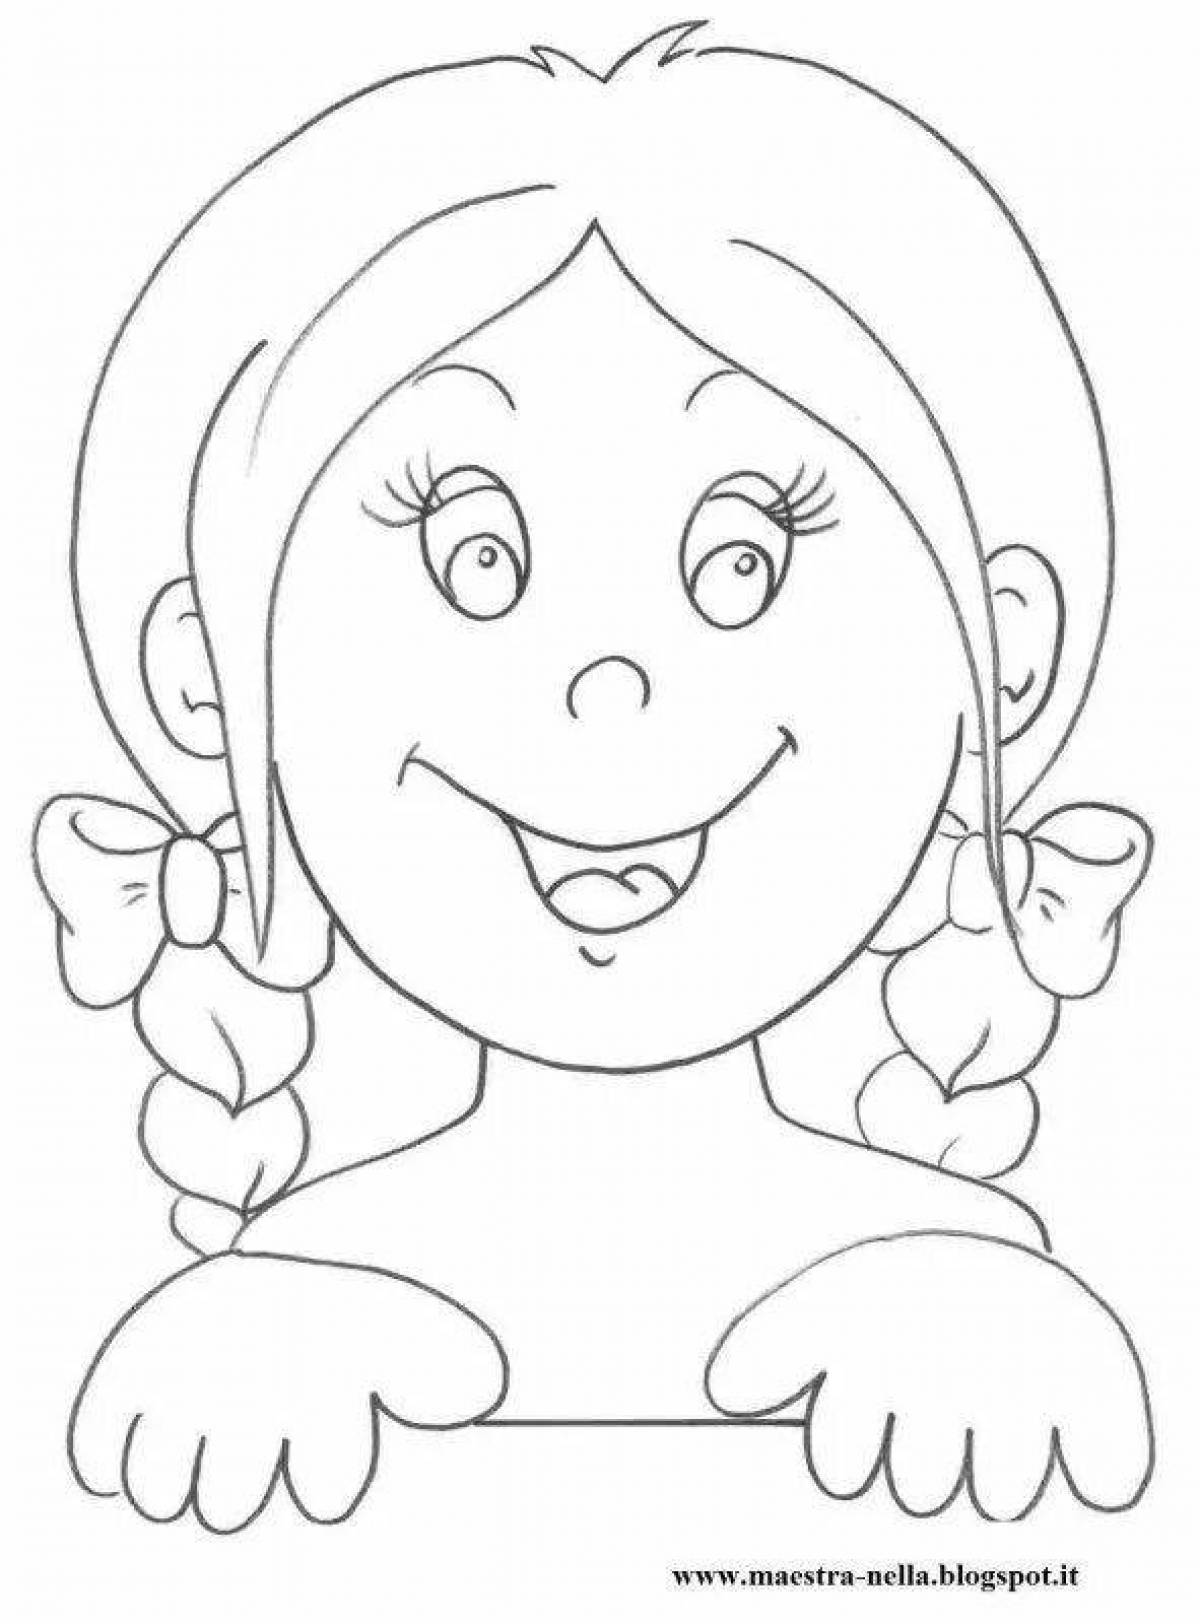 Exquisite girl head coloring book